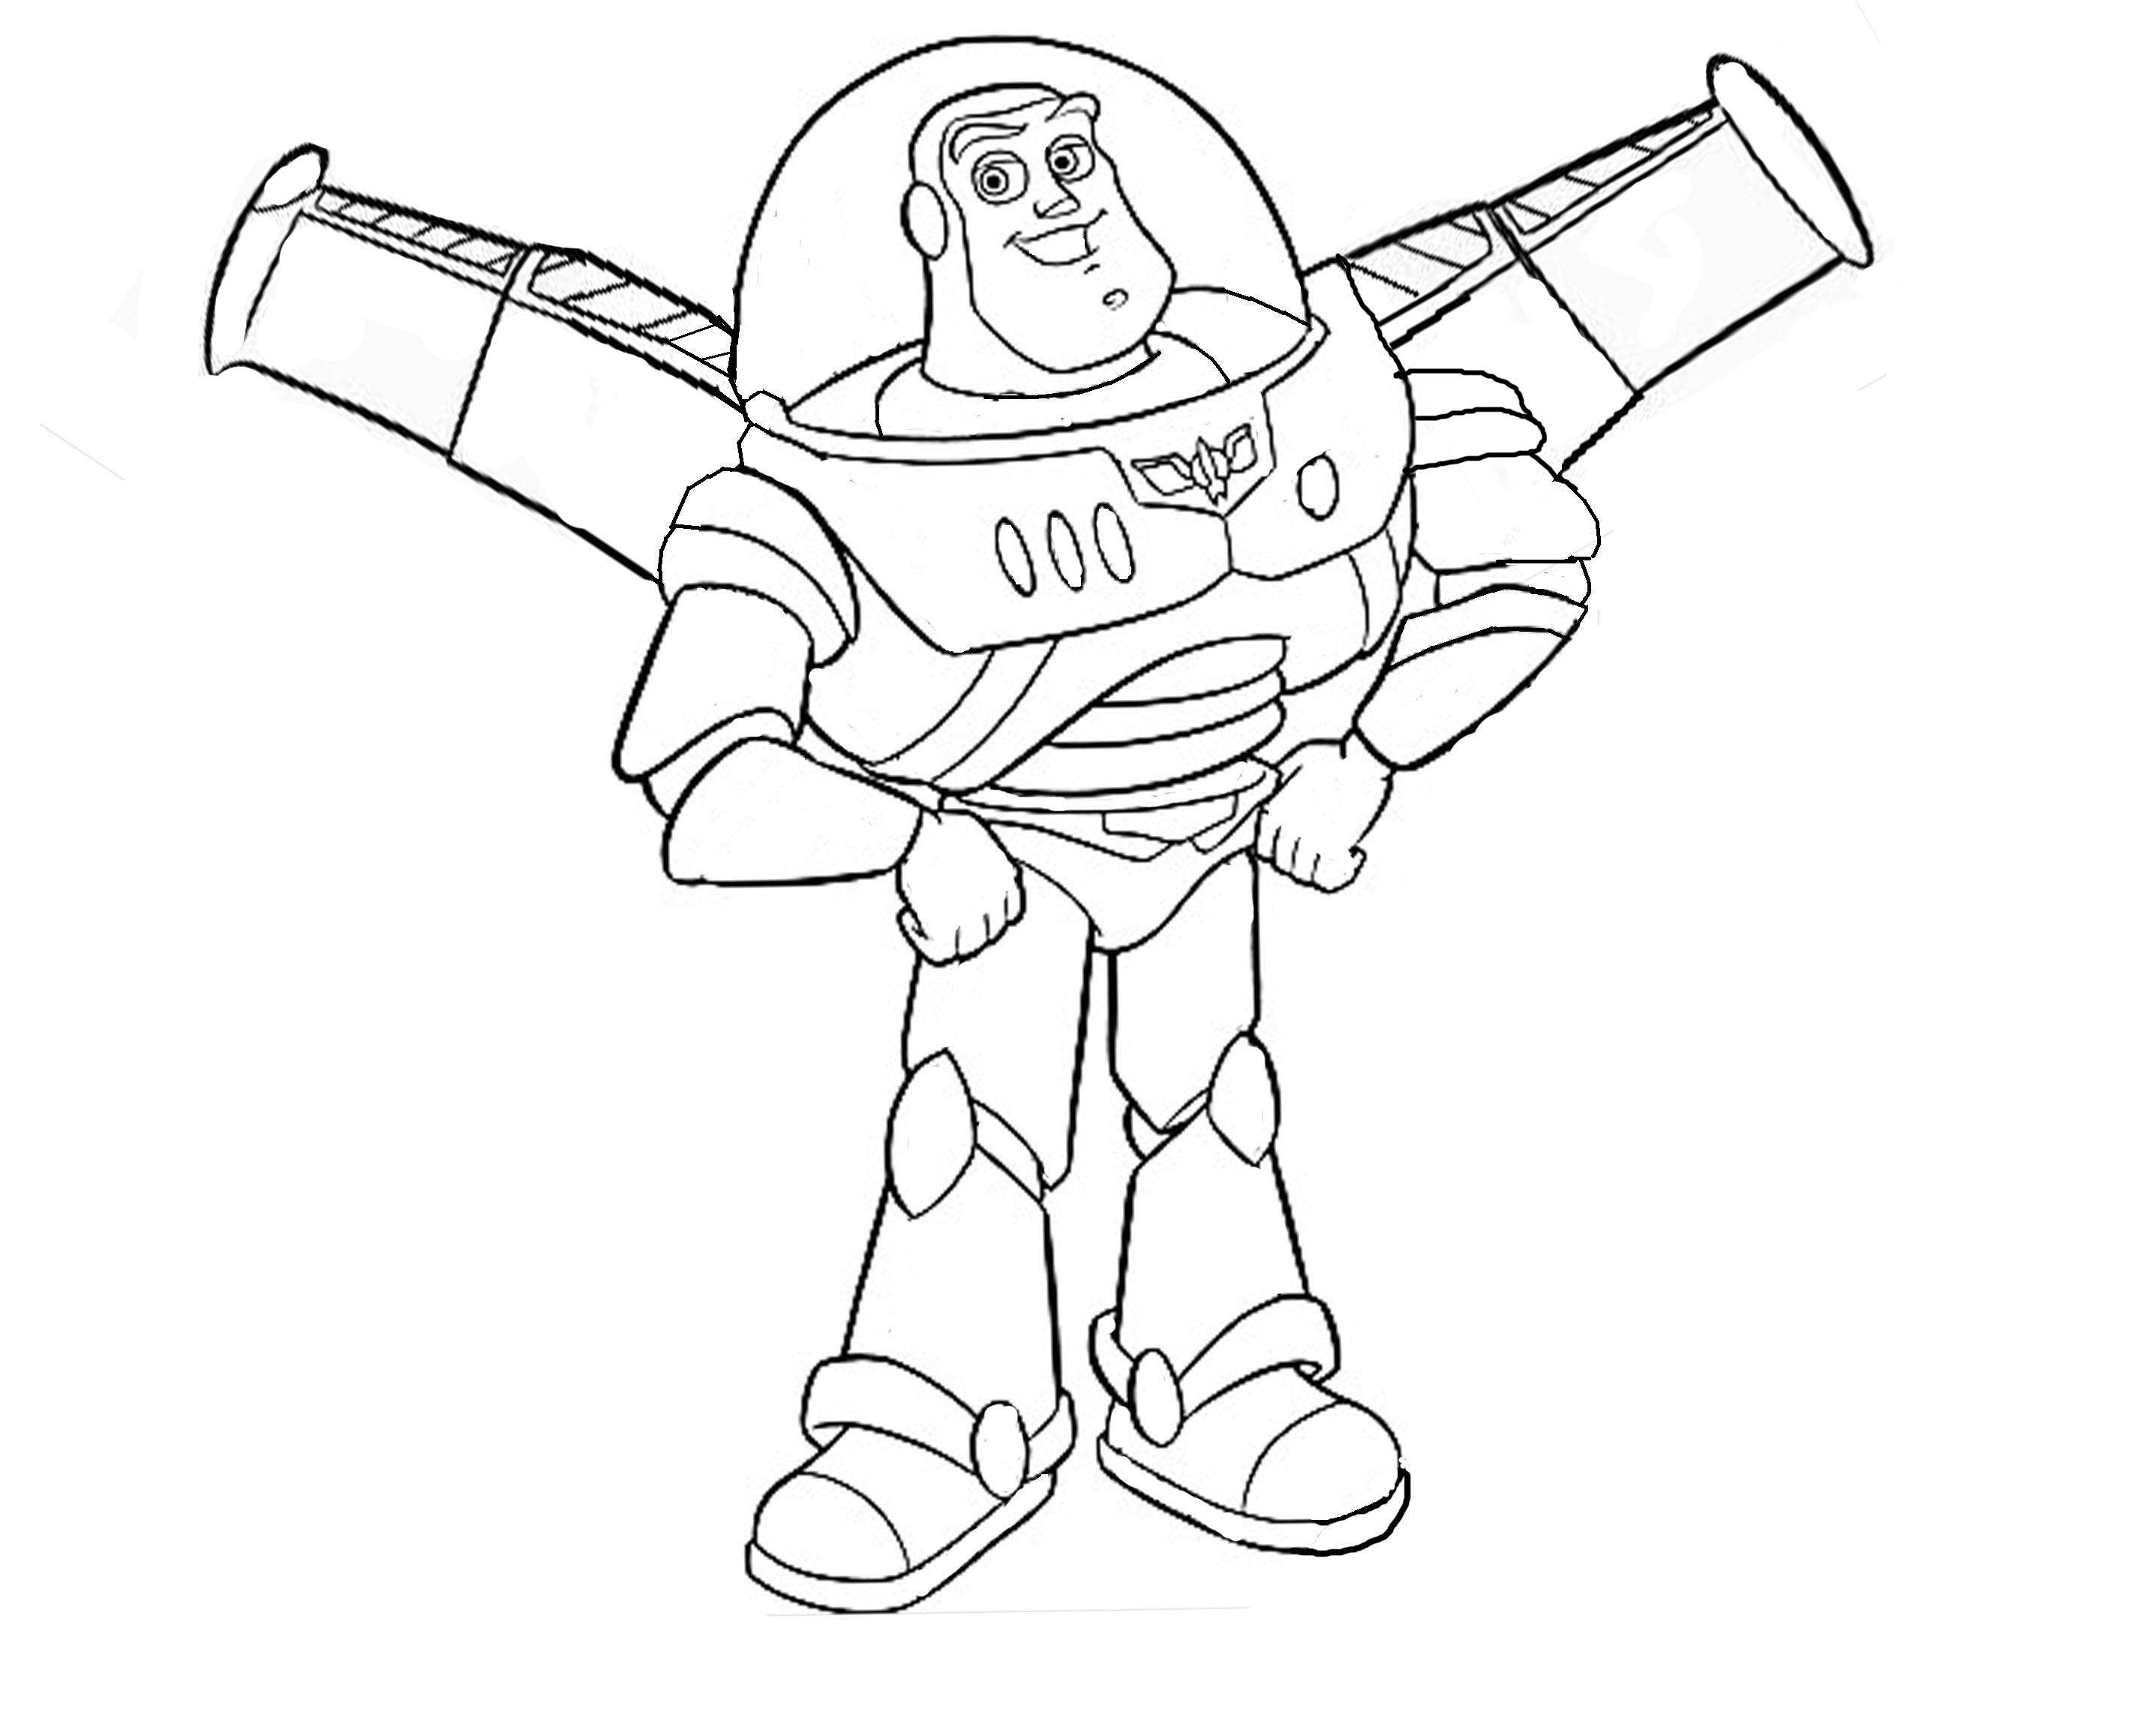 Incredible Toy Story coloring page to print and color for free : Buzz Lightyear with his wings